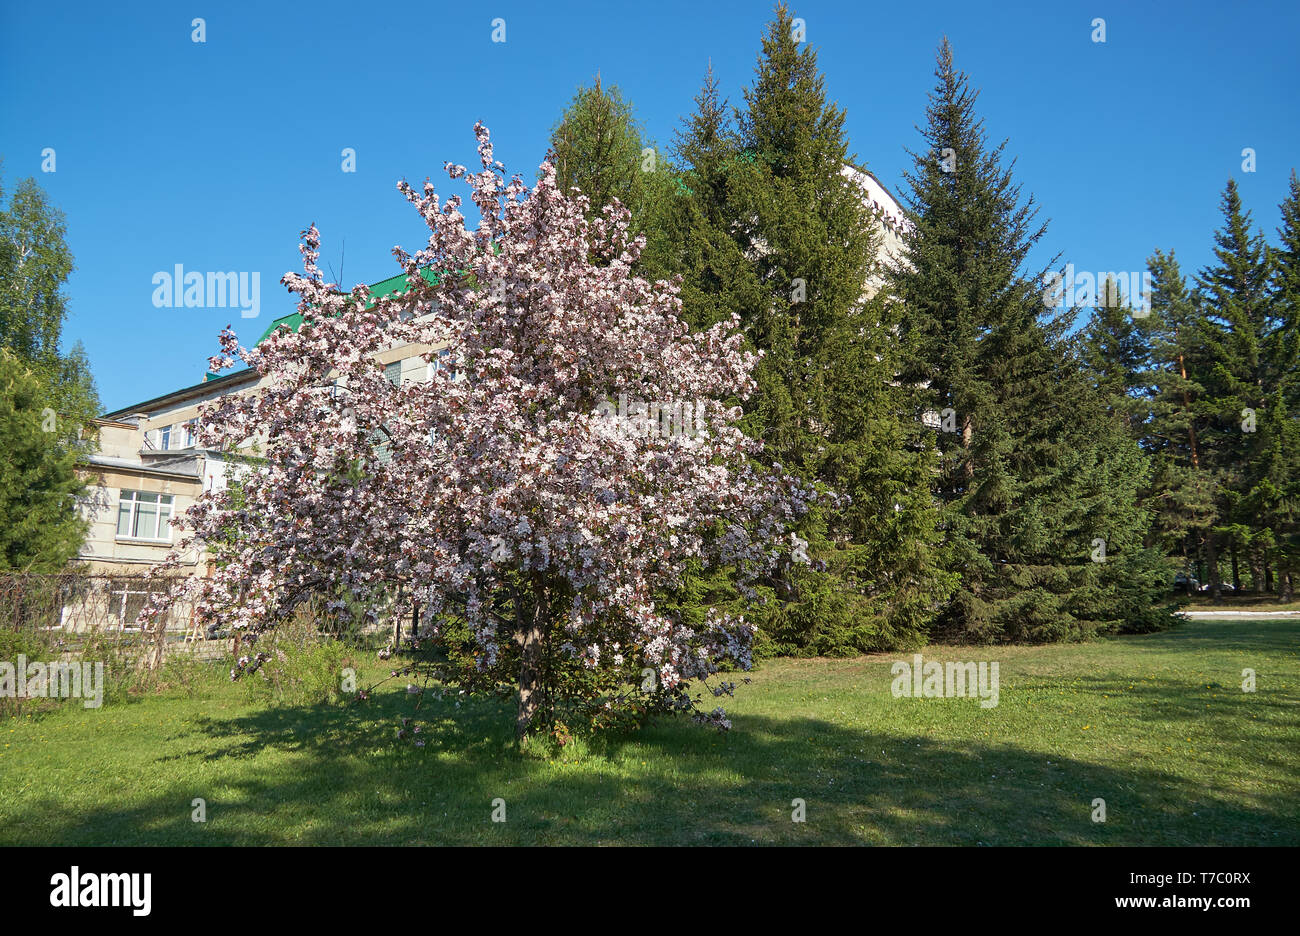 Shot of blooming apple tree crown with pink flowers.  Institute of Cytology and Genetics building on the background Stock Photo